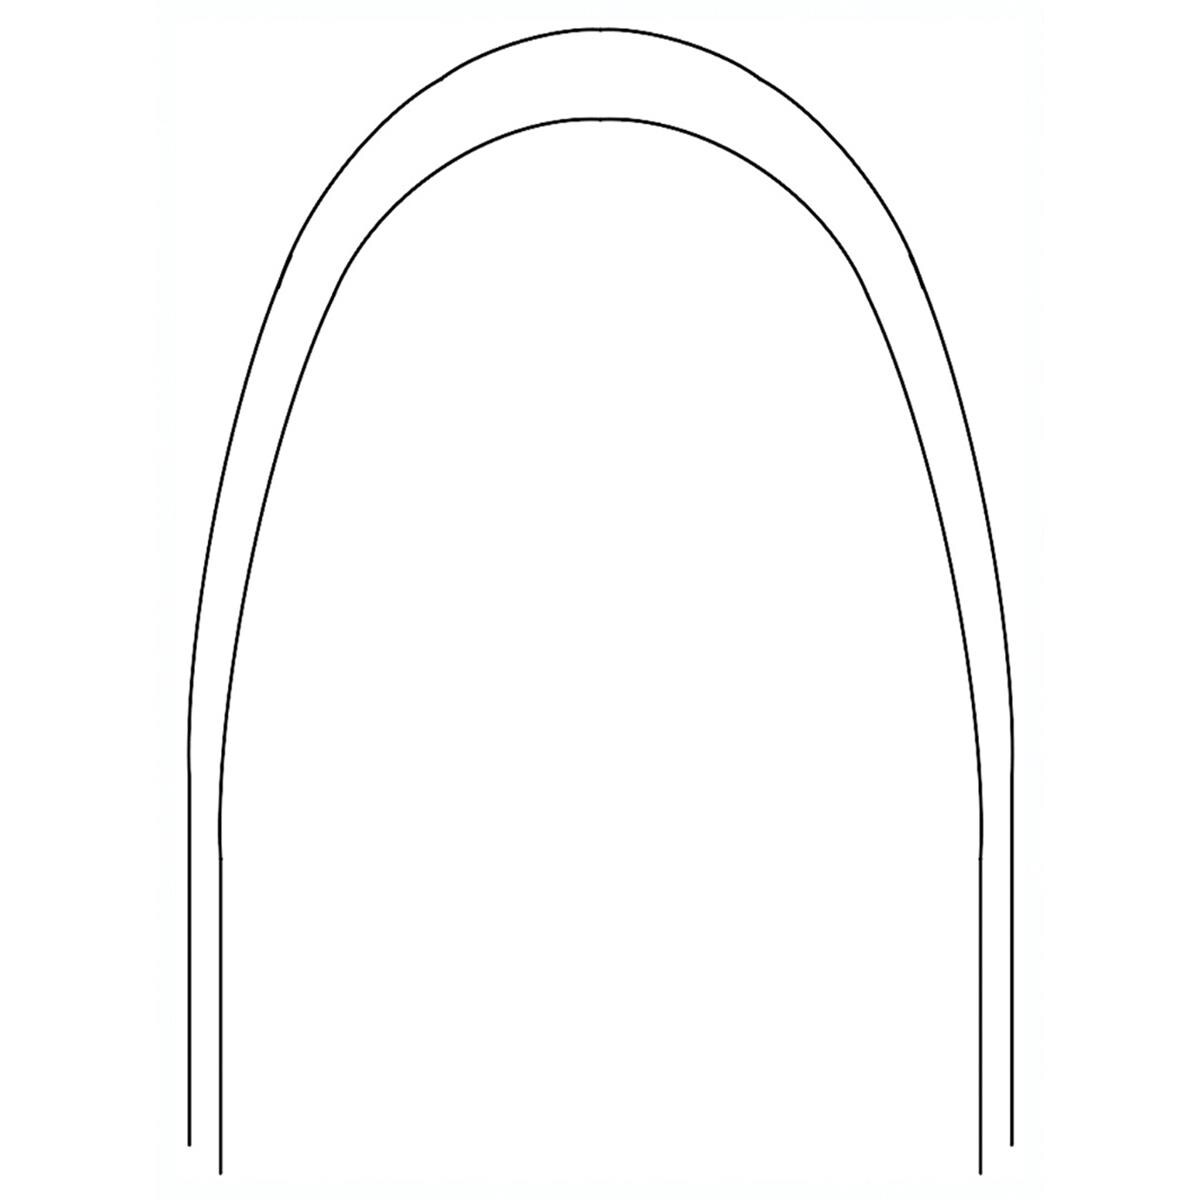 Archwire Stainless Steel Bright Oval Arch Form III Shape 016x022 Upper 10pk